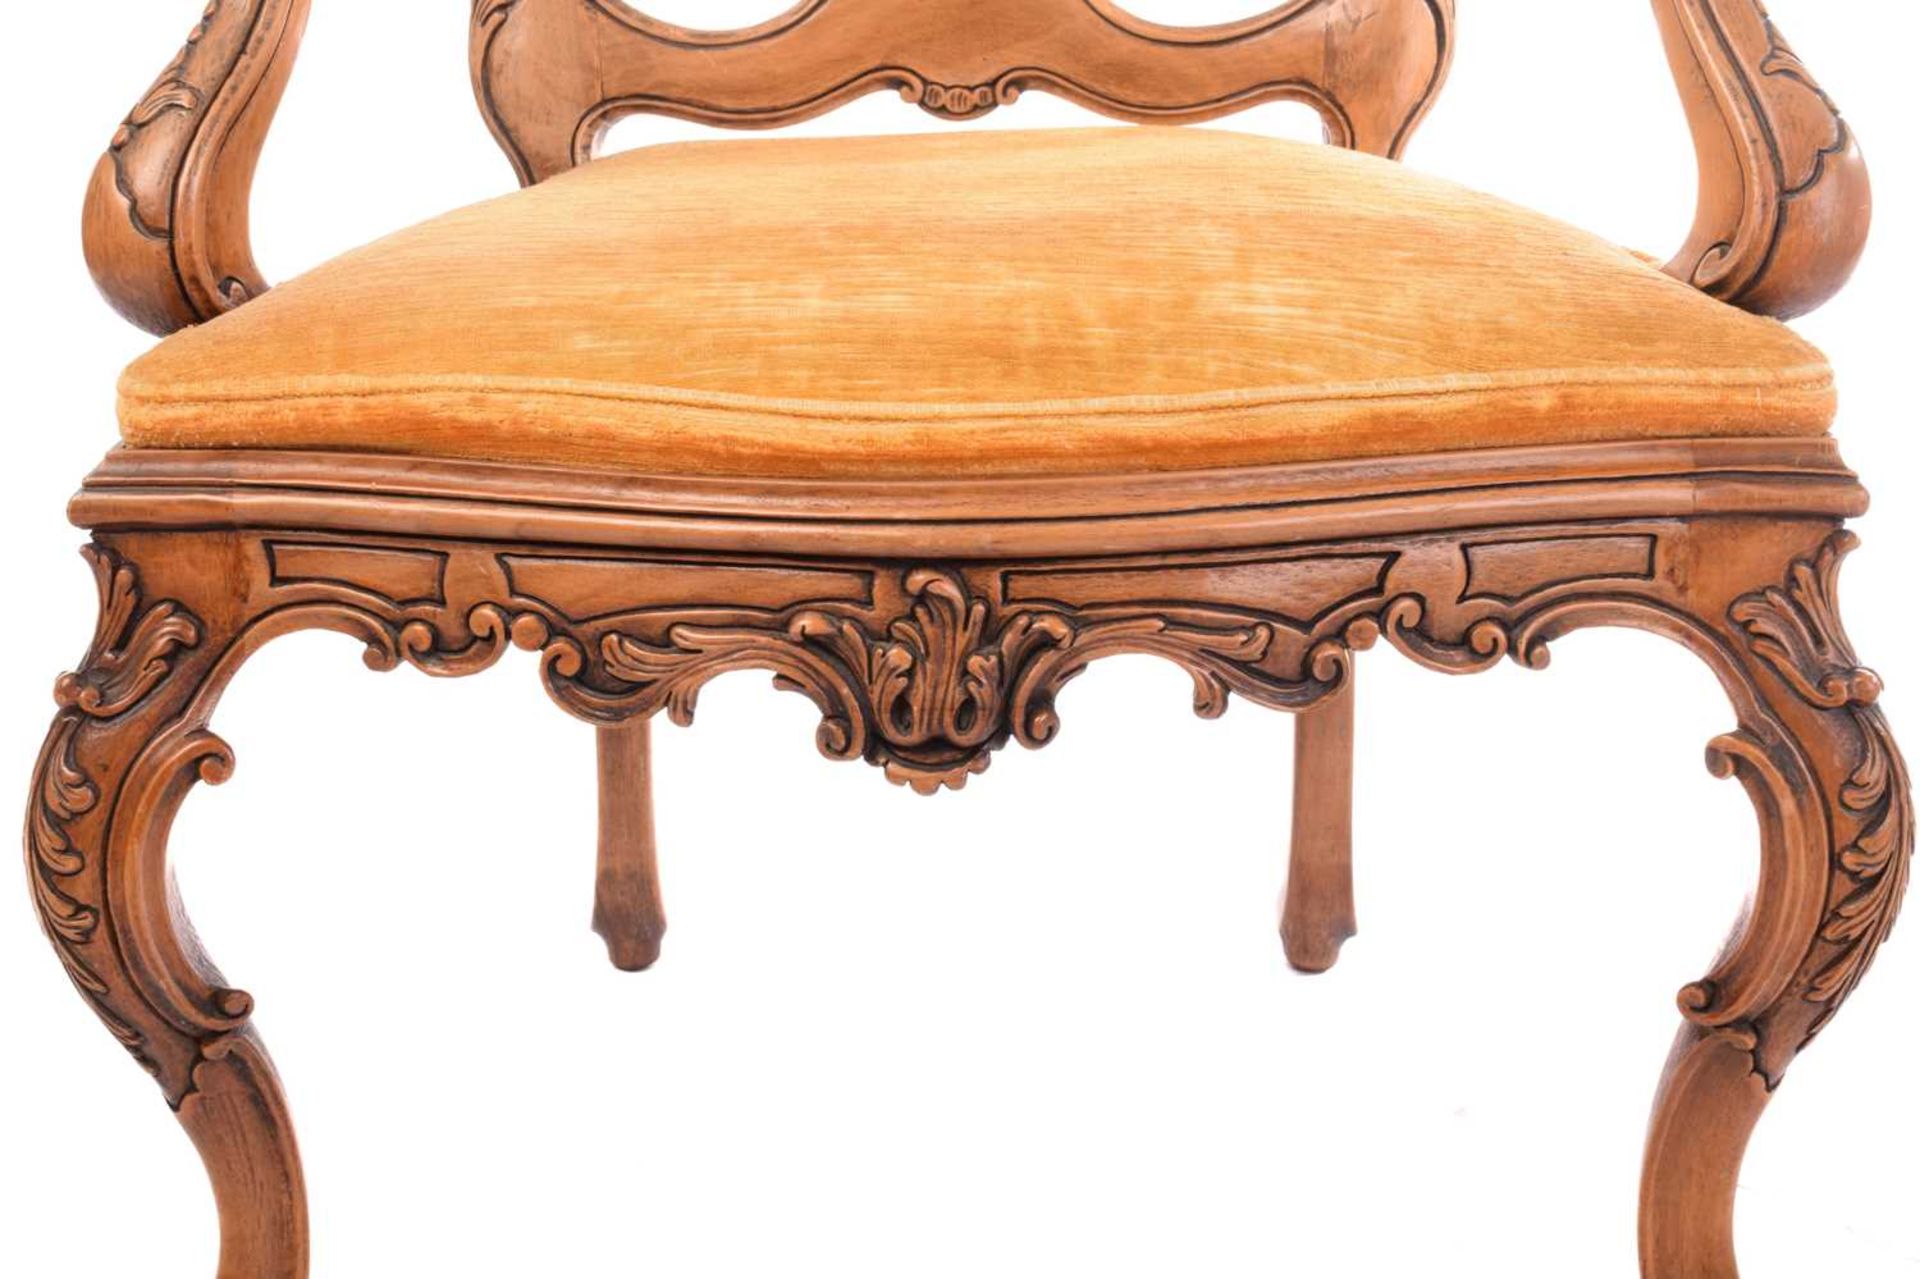 An 18th-century Venetian style carved walnut open armchair, 20th century with shaped spoon back - Image 4 of 5